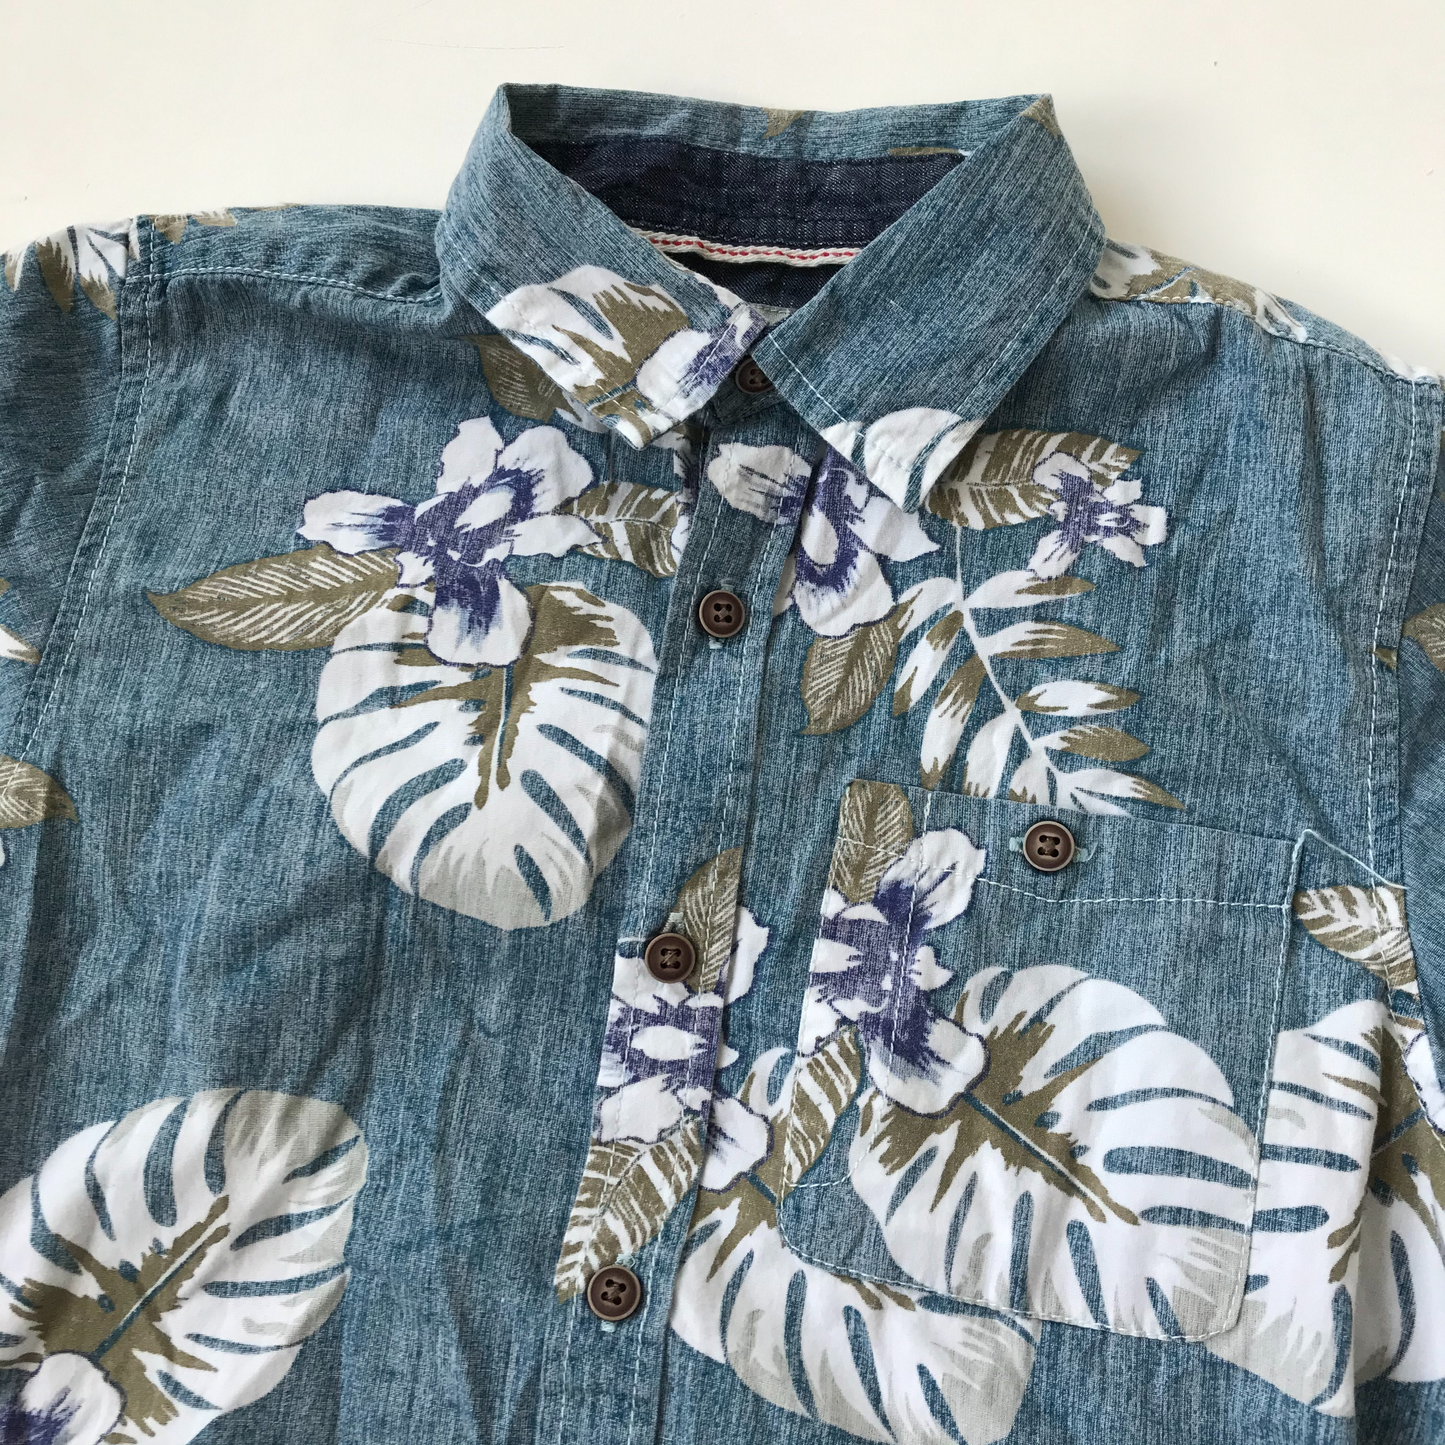 Light Washed-out-style Blue Floral Short Sleeve Shirt Age 10